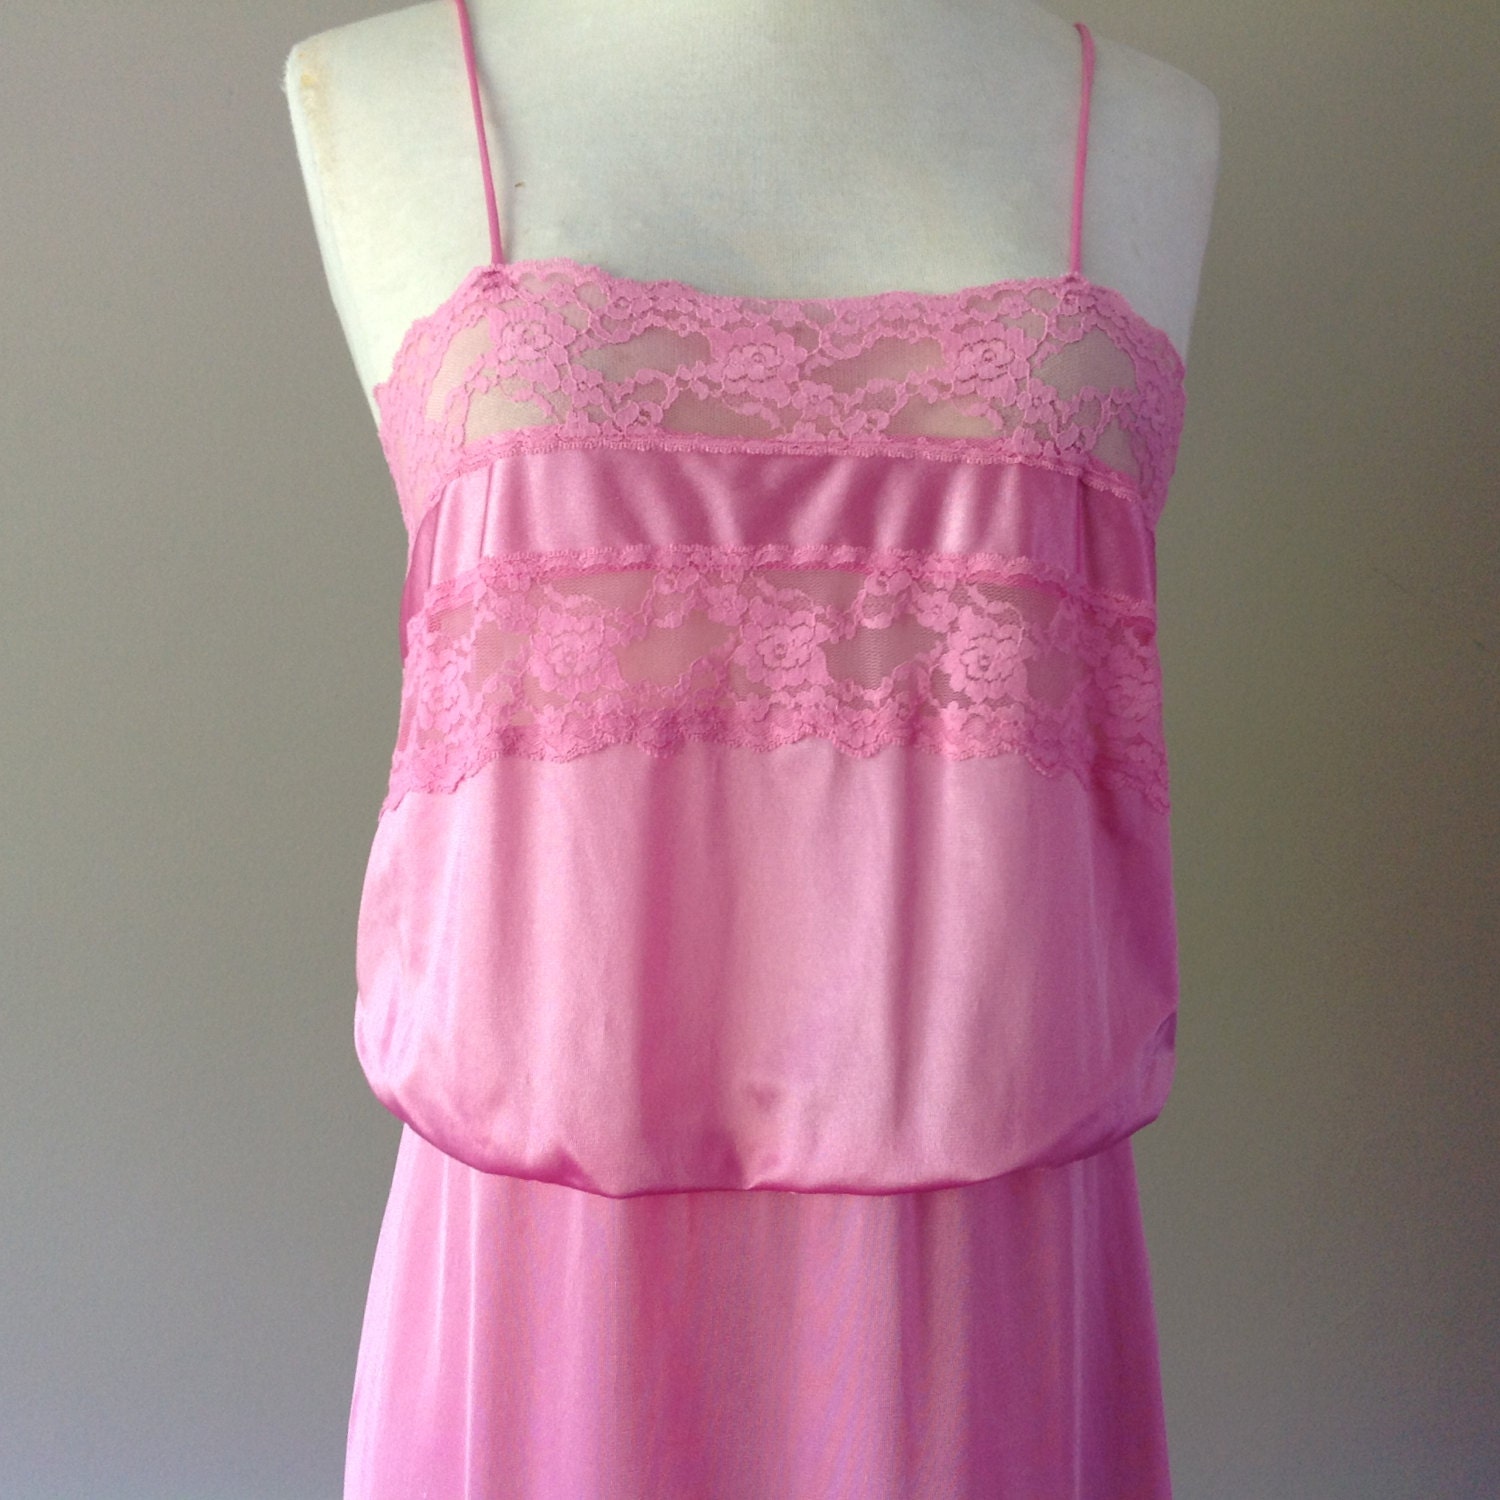 S / Nylon Nightgown / Pink with Lace / Vintage Sleepwear